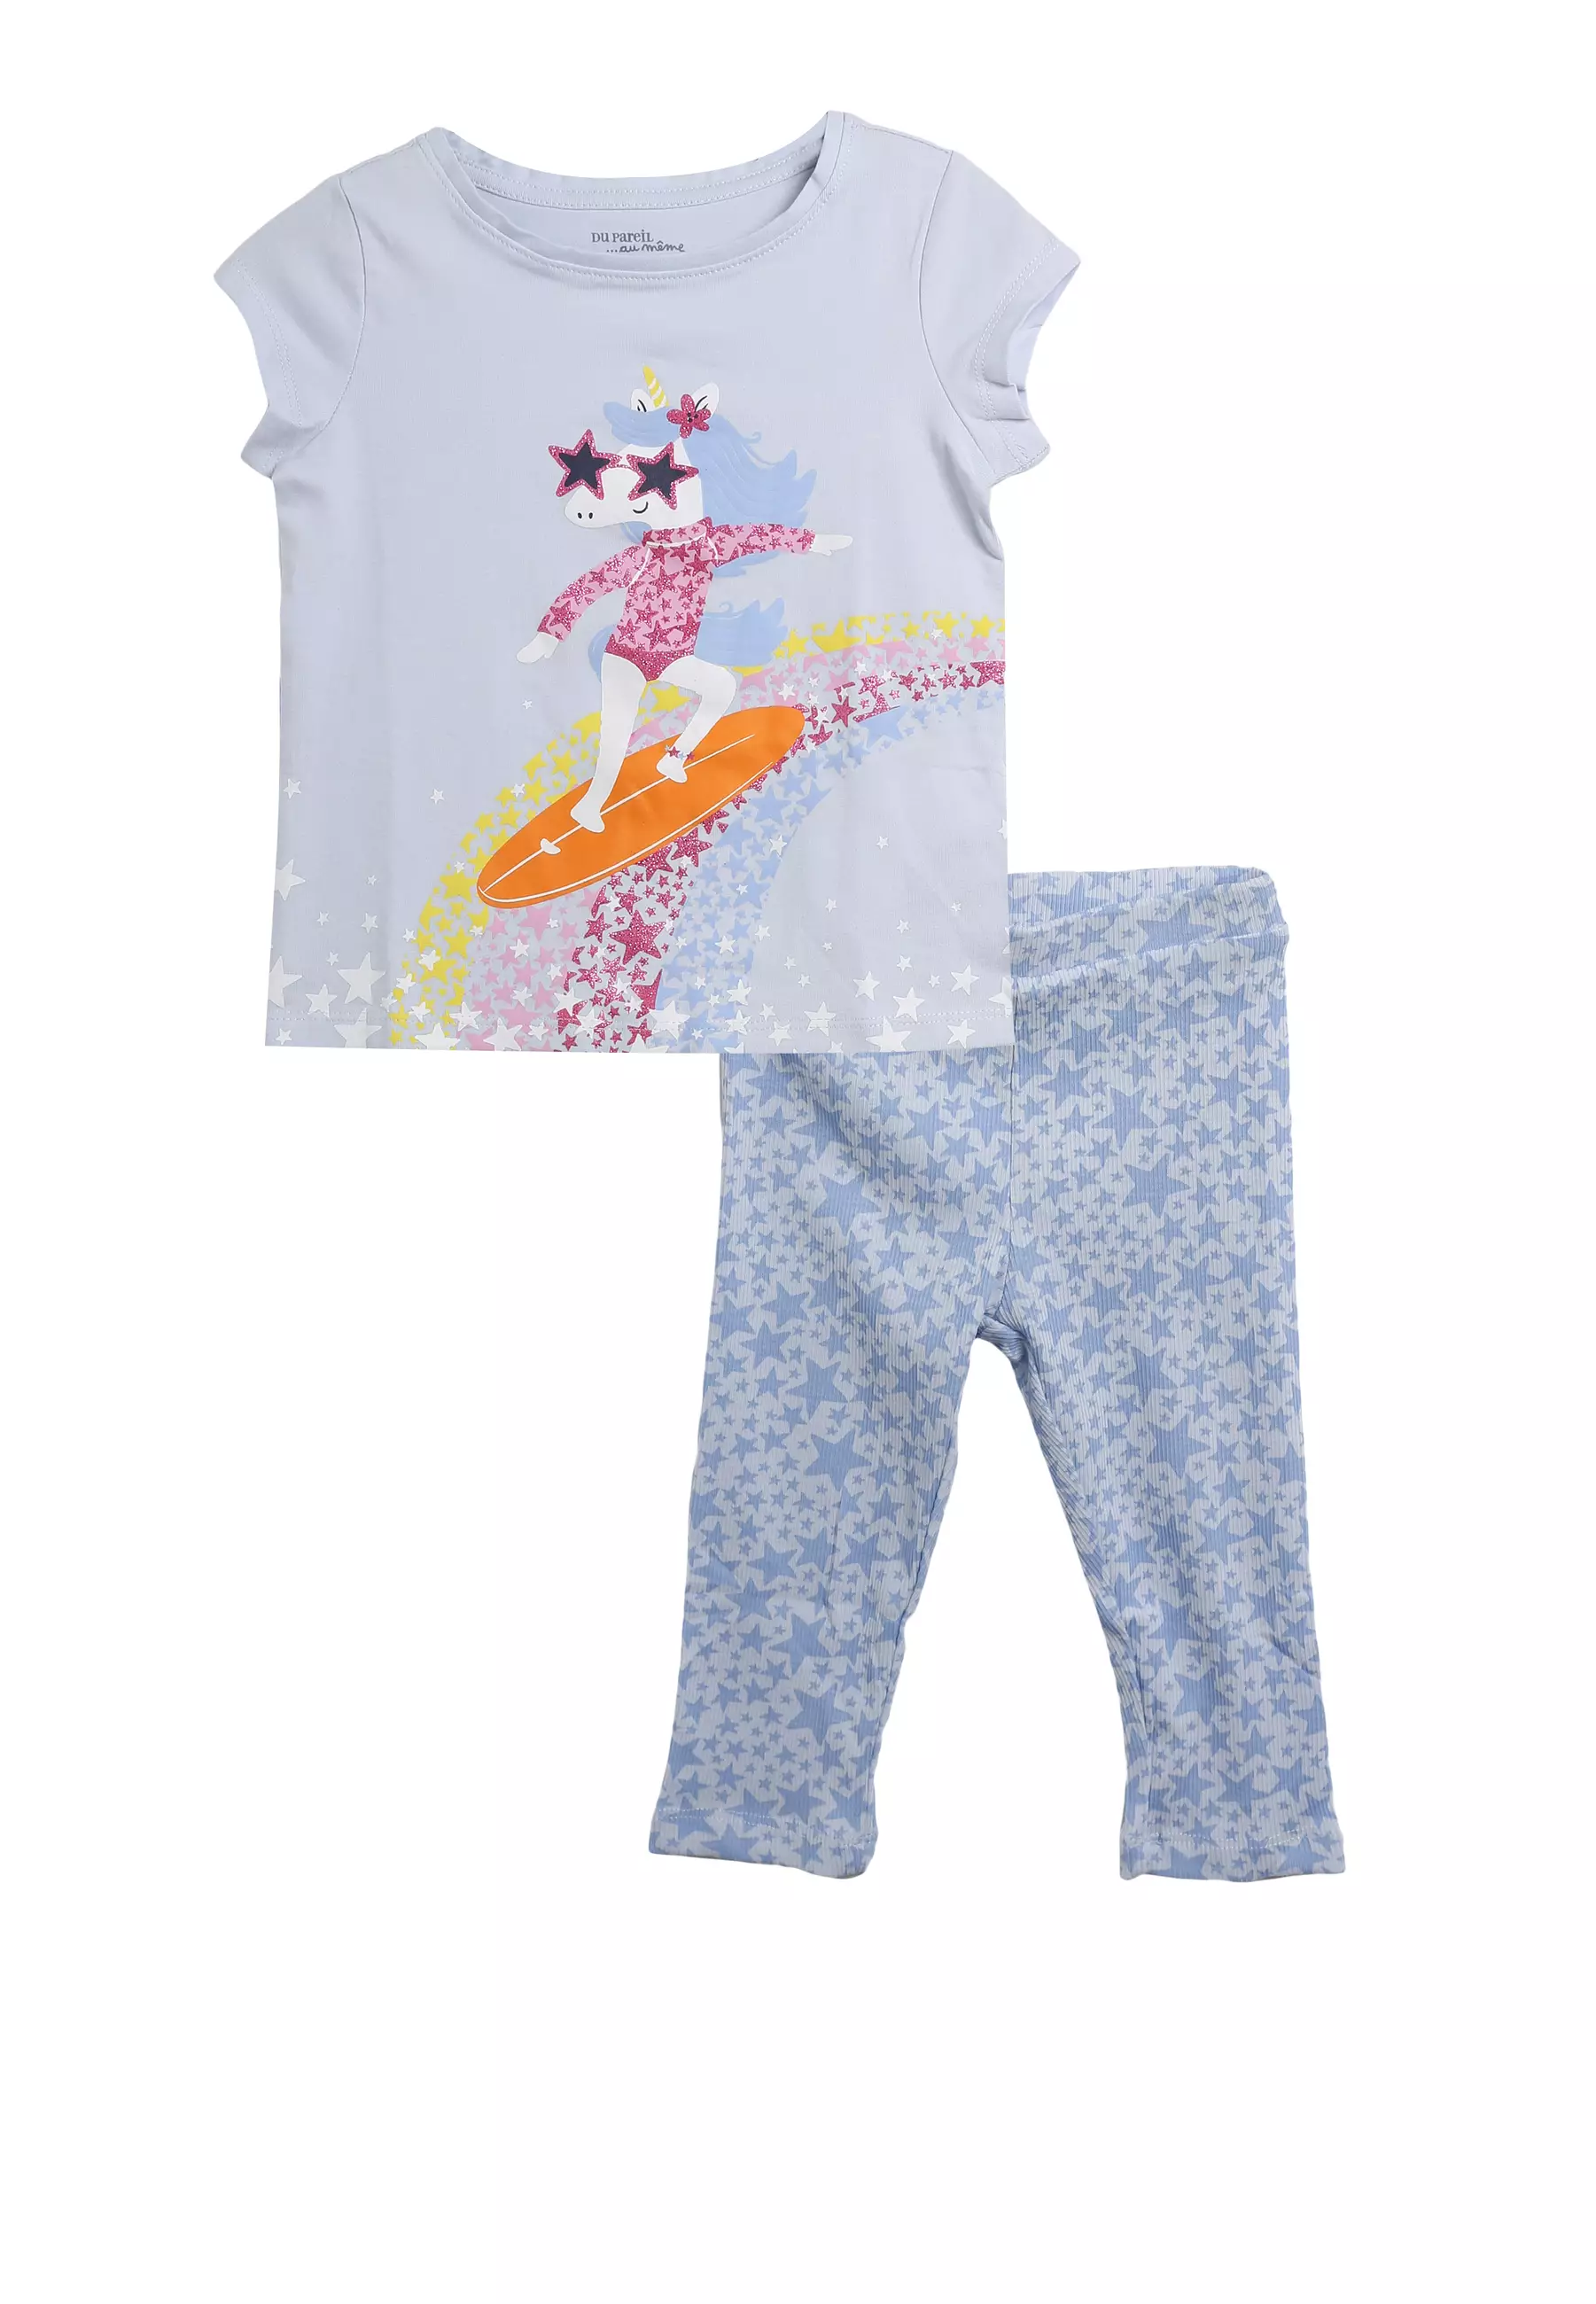 Justice Girls Long Sleeve Graphic Top and Tie Dye Legging, 2-Piece Outfit  Set